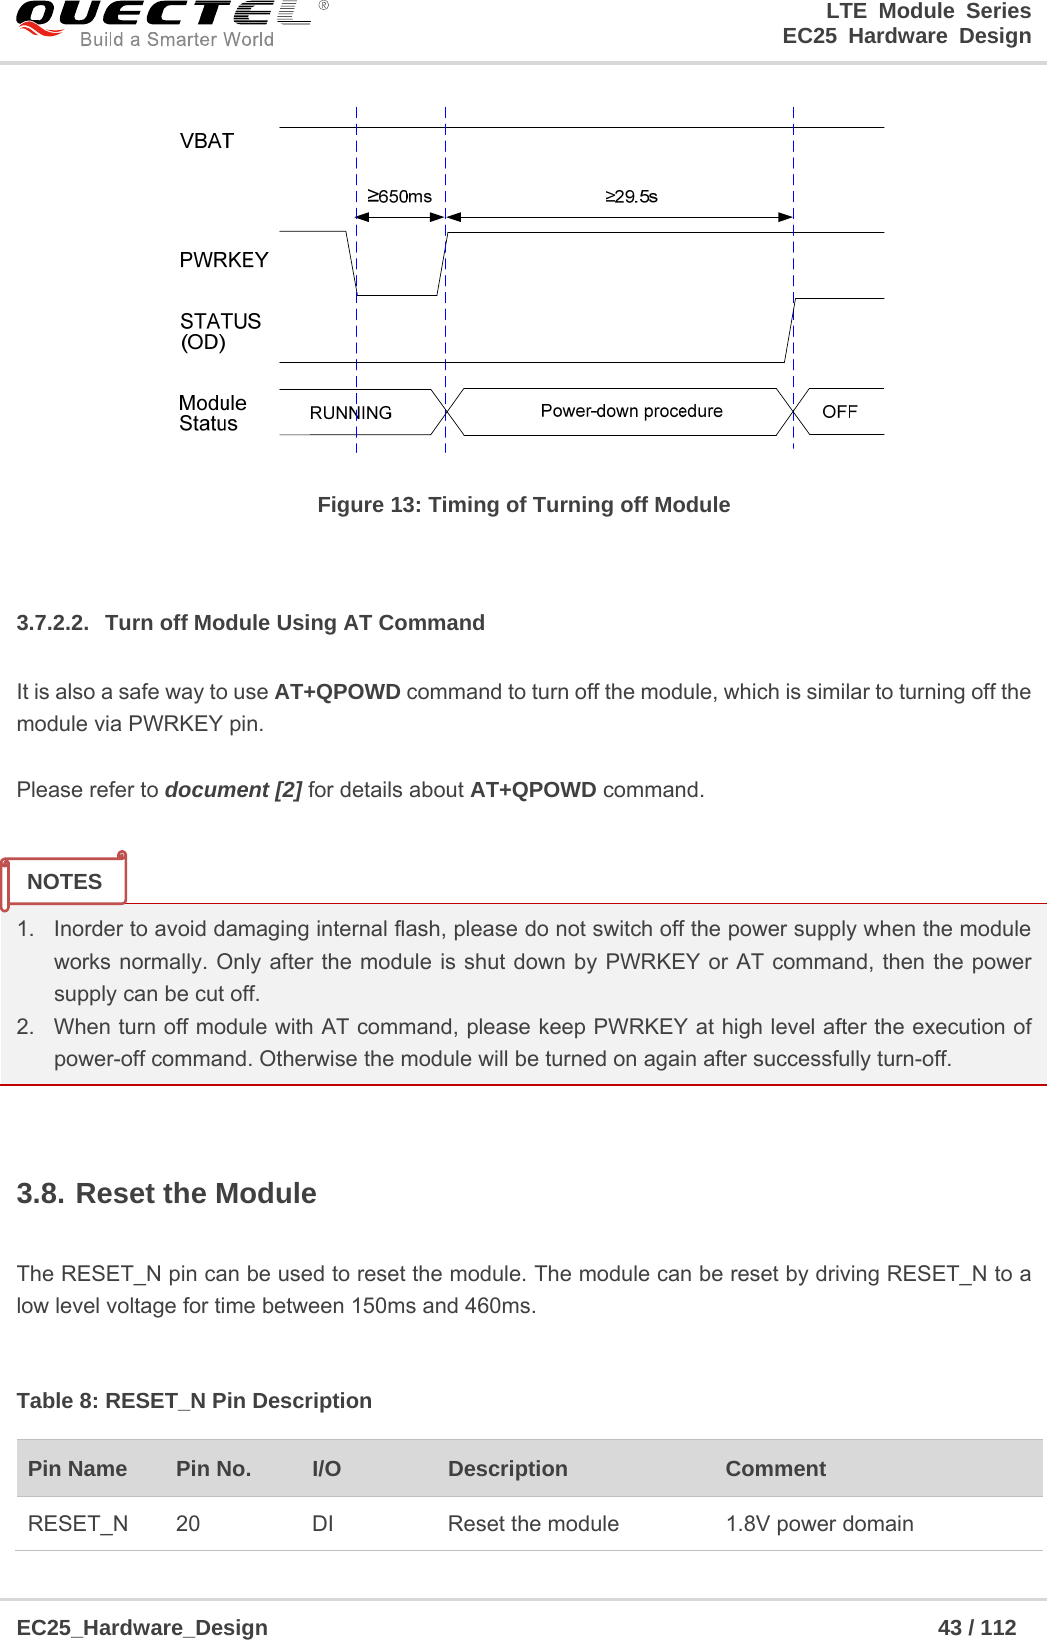 LTE Module Series                                                  EC25 Hardware Design  EC25_Hardware_Design                                                             43 / 112     Figure 13: Timing of Turning off Module  3.7.2.2.  Turn off Module Using AT Command It is also a safe way to use AT+QPOWD command to turn off the module, which is similar to turning off the module via PWRKEY pin.  Please refer to document [2] for details about AT+QPOWD command.   1.  Inorder to avoid damaging internal flash, please do not switch off the power supply when the module works normally. Only after the module is shut down by PWRKEY or AT command, then the power supply can be cut off. 2.  When turn off module with AT command, please keep PWRKEY at high level after the execution of power-off command. Otherwise the module will be turned on again after successfully turn-off.  3.8. Reset the Module  The RESET_N pin can be used to reset the module. The module can be reset by driving RESET_N to a low level voltage for time between 150ms and 460ms.  Table 8: RESET_N Pin Description Pin Name    Pin No.  I/O  Description  Comment RESET_N  20  DI  Reset the module  1.8V power domain NOTES 